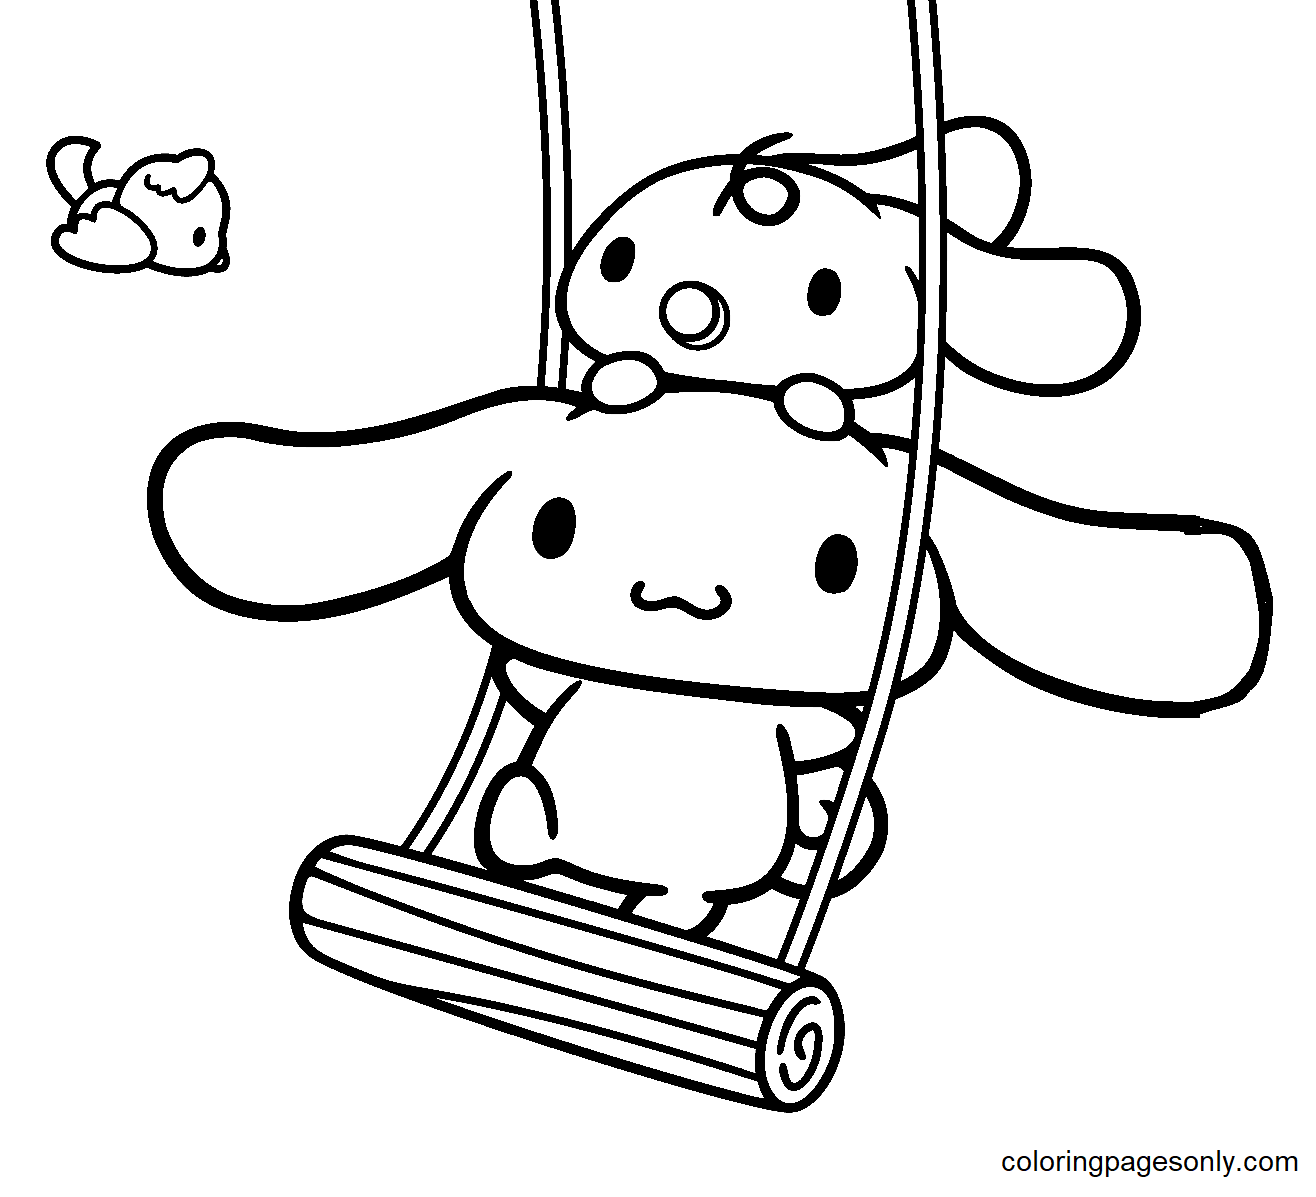 Cinnamoroll Coloring Pages - Free Printable Coloring Pages